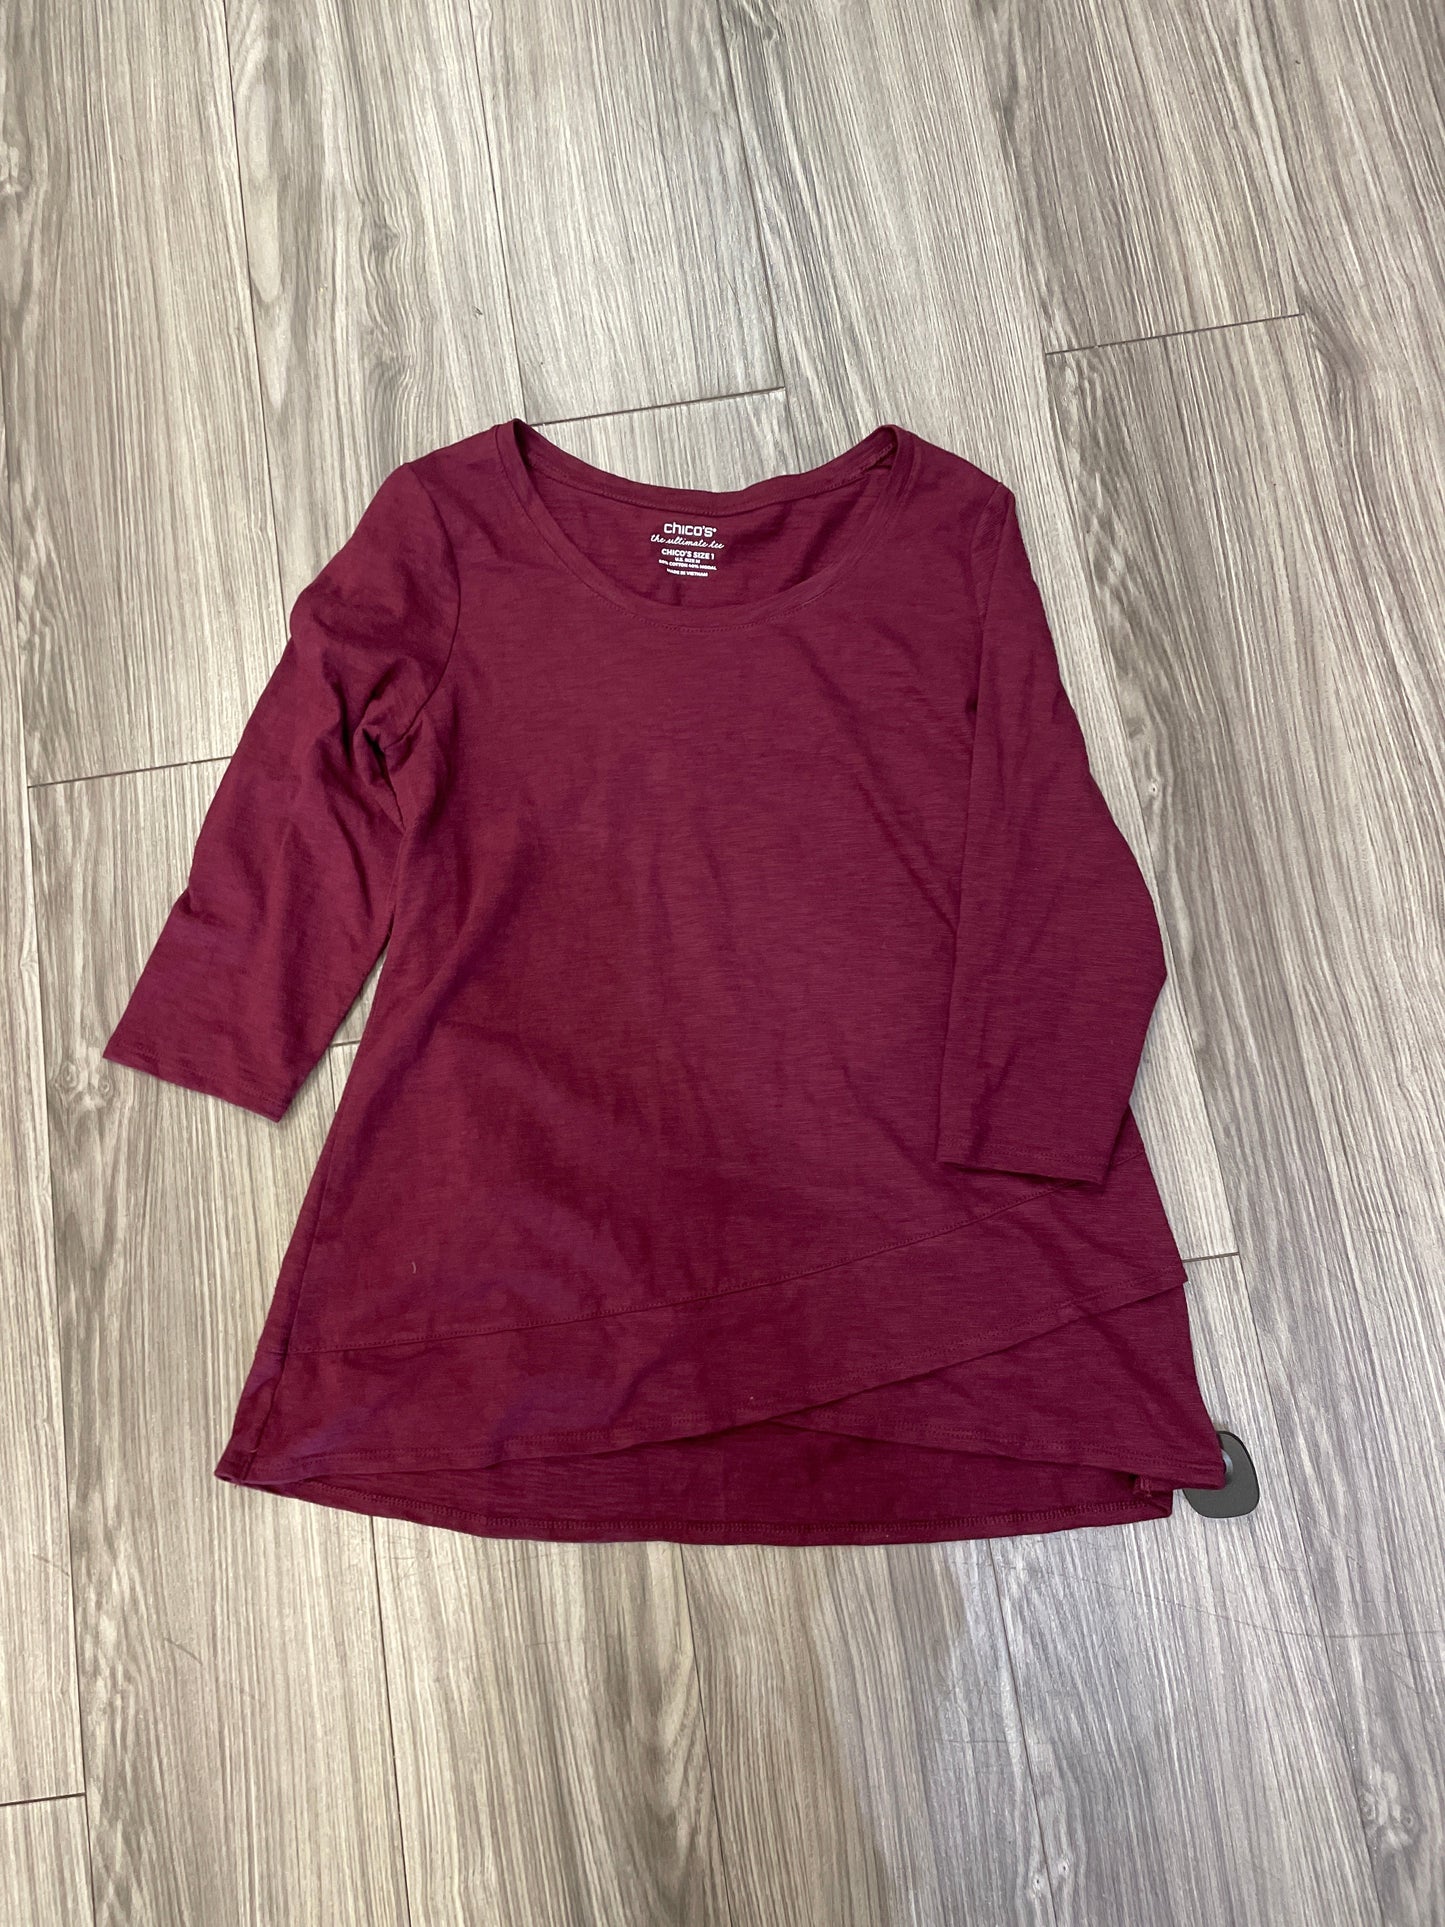 Red Top 3/4 Sleeve Chicos, Size M